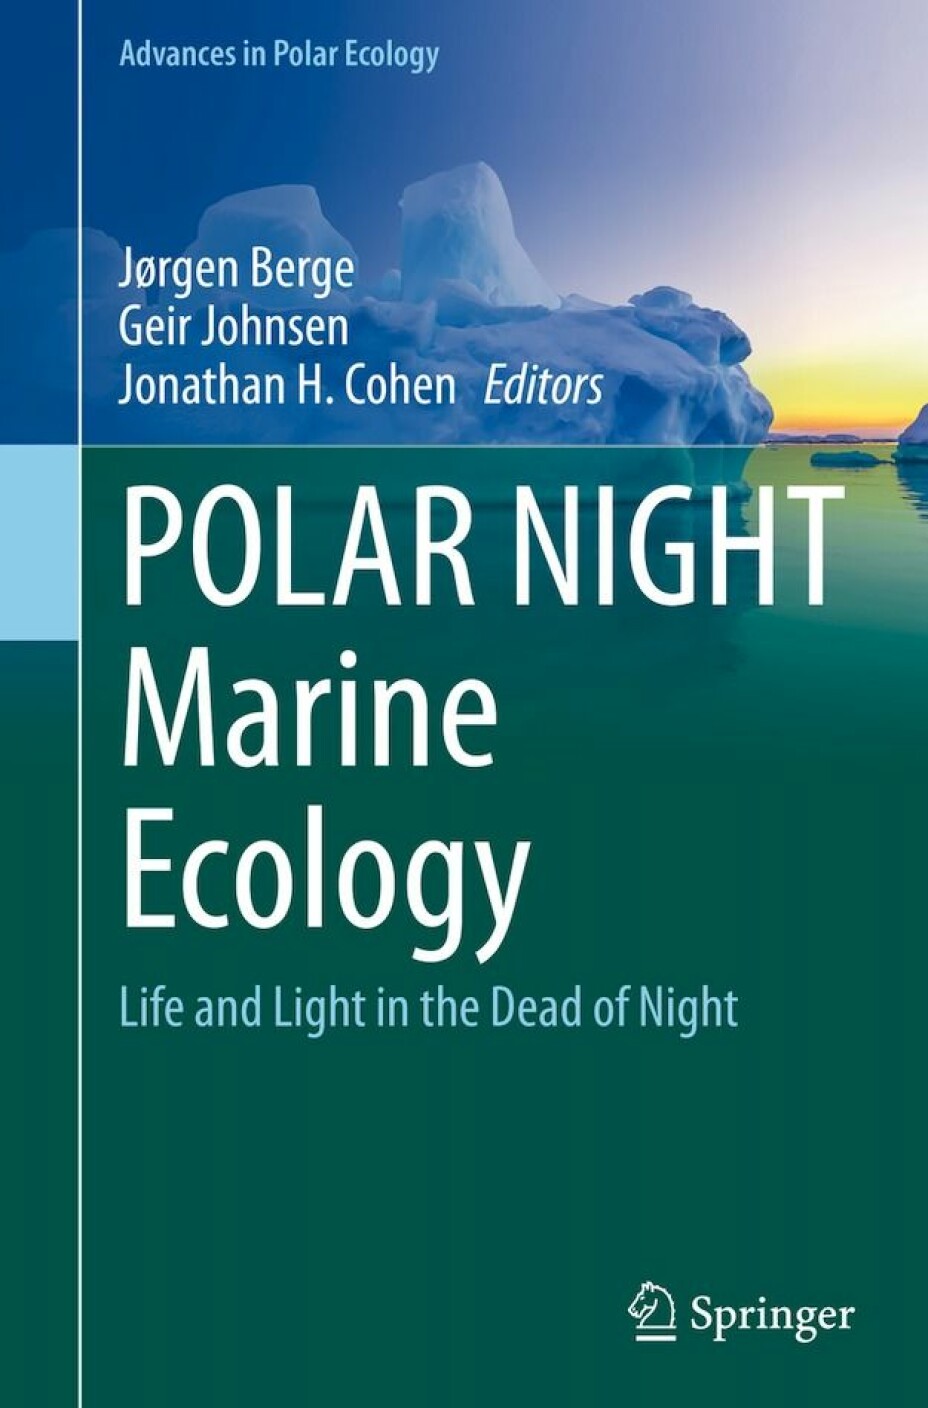 “Until recently, the prevailing view of marine life at high latitudes has been that organisms enter a general resting state during the dark Polar Night and that the system only awakens with the return of the sun. Recent research, however, with coordinated, multidisciplinary field campaigns based on the high Arctic Archipelago of Svalbard, have provided a radical new perspective,” the publishers of this new book on the polar night say. The book is scheduled for publication in late April.